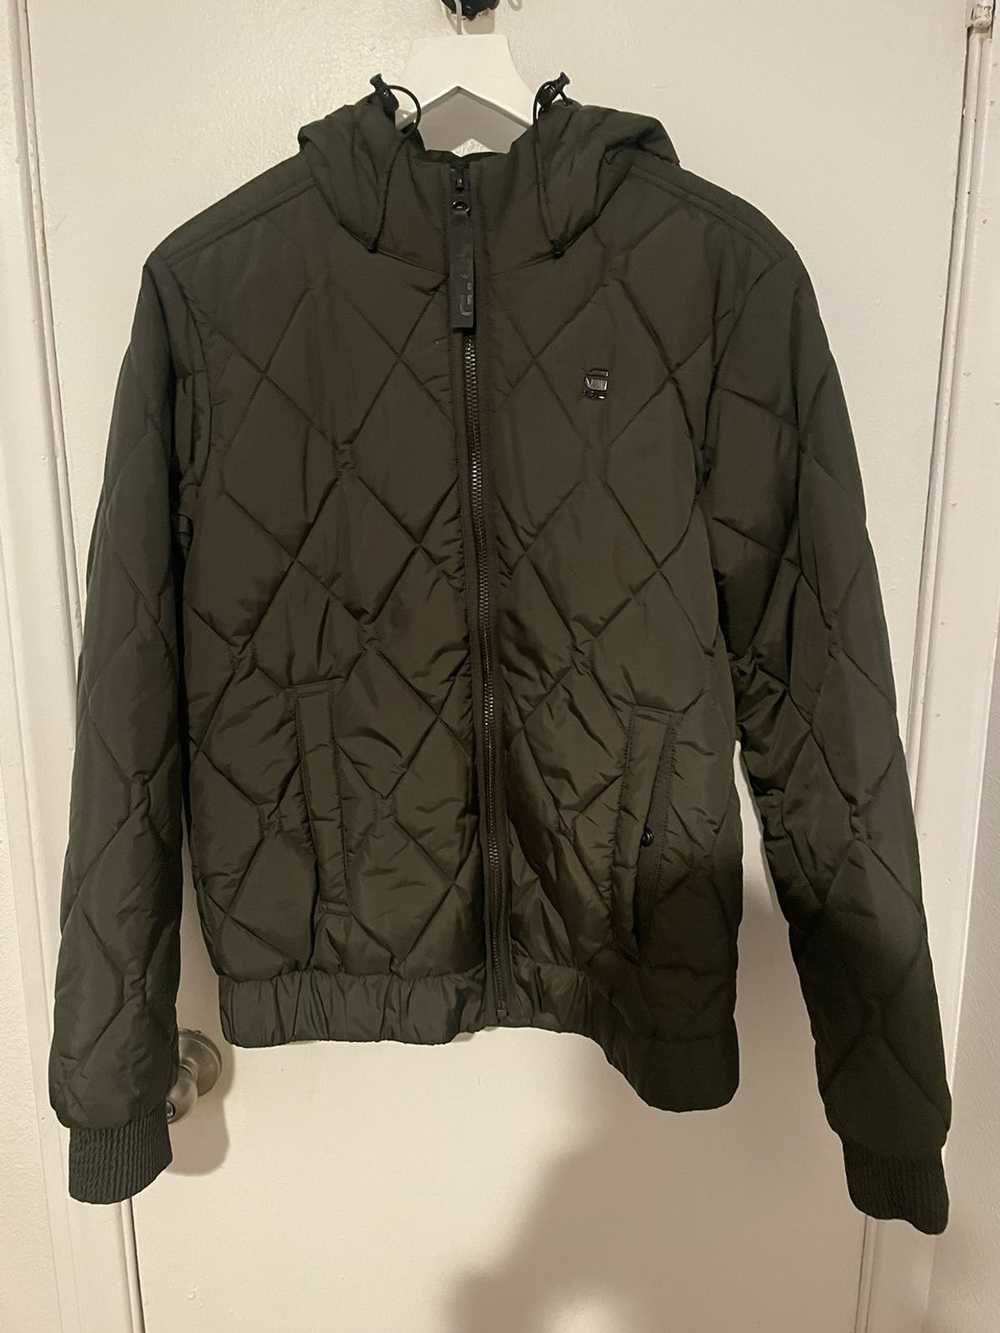 G Star Raw G-Star quilted jacket - image 1